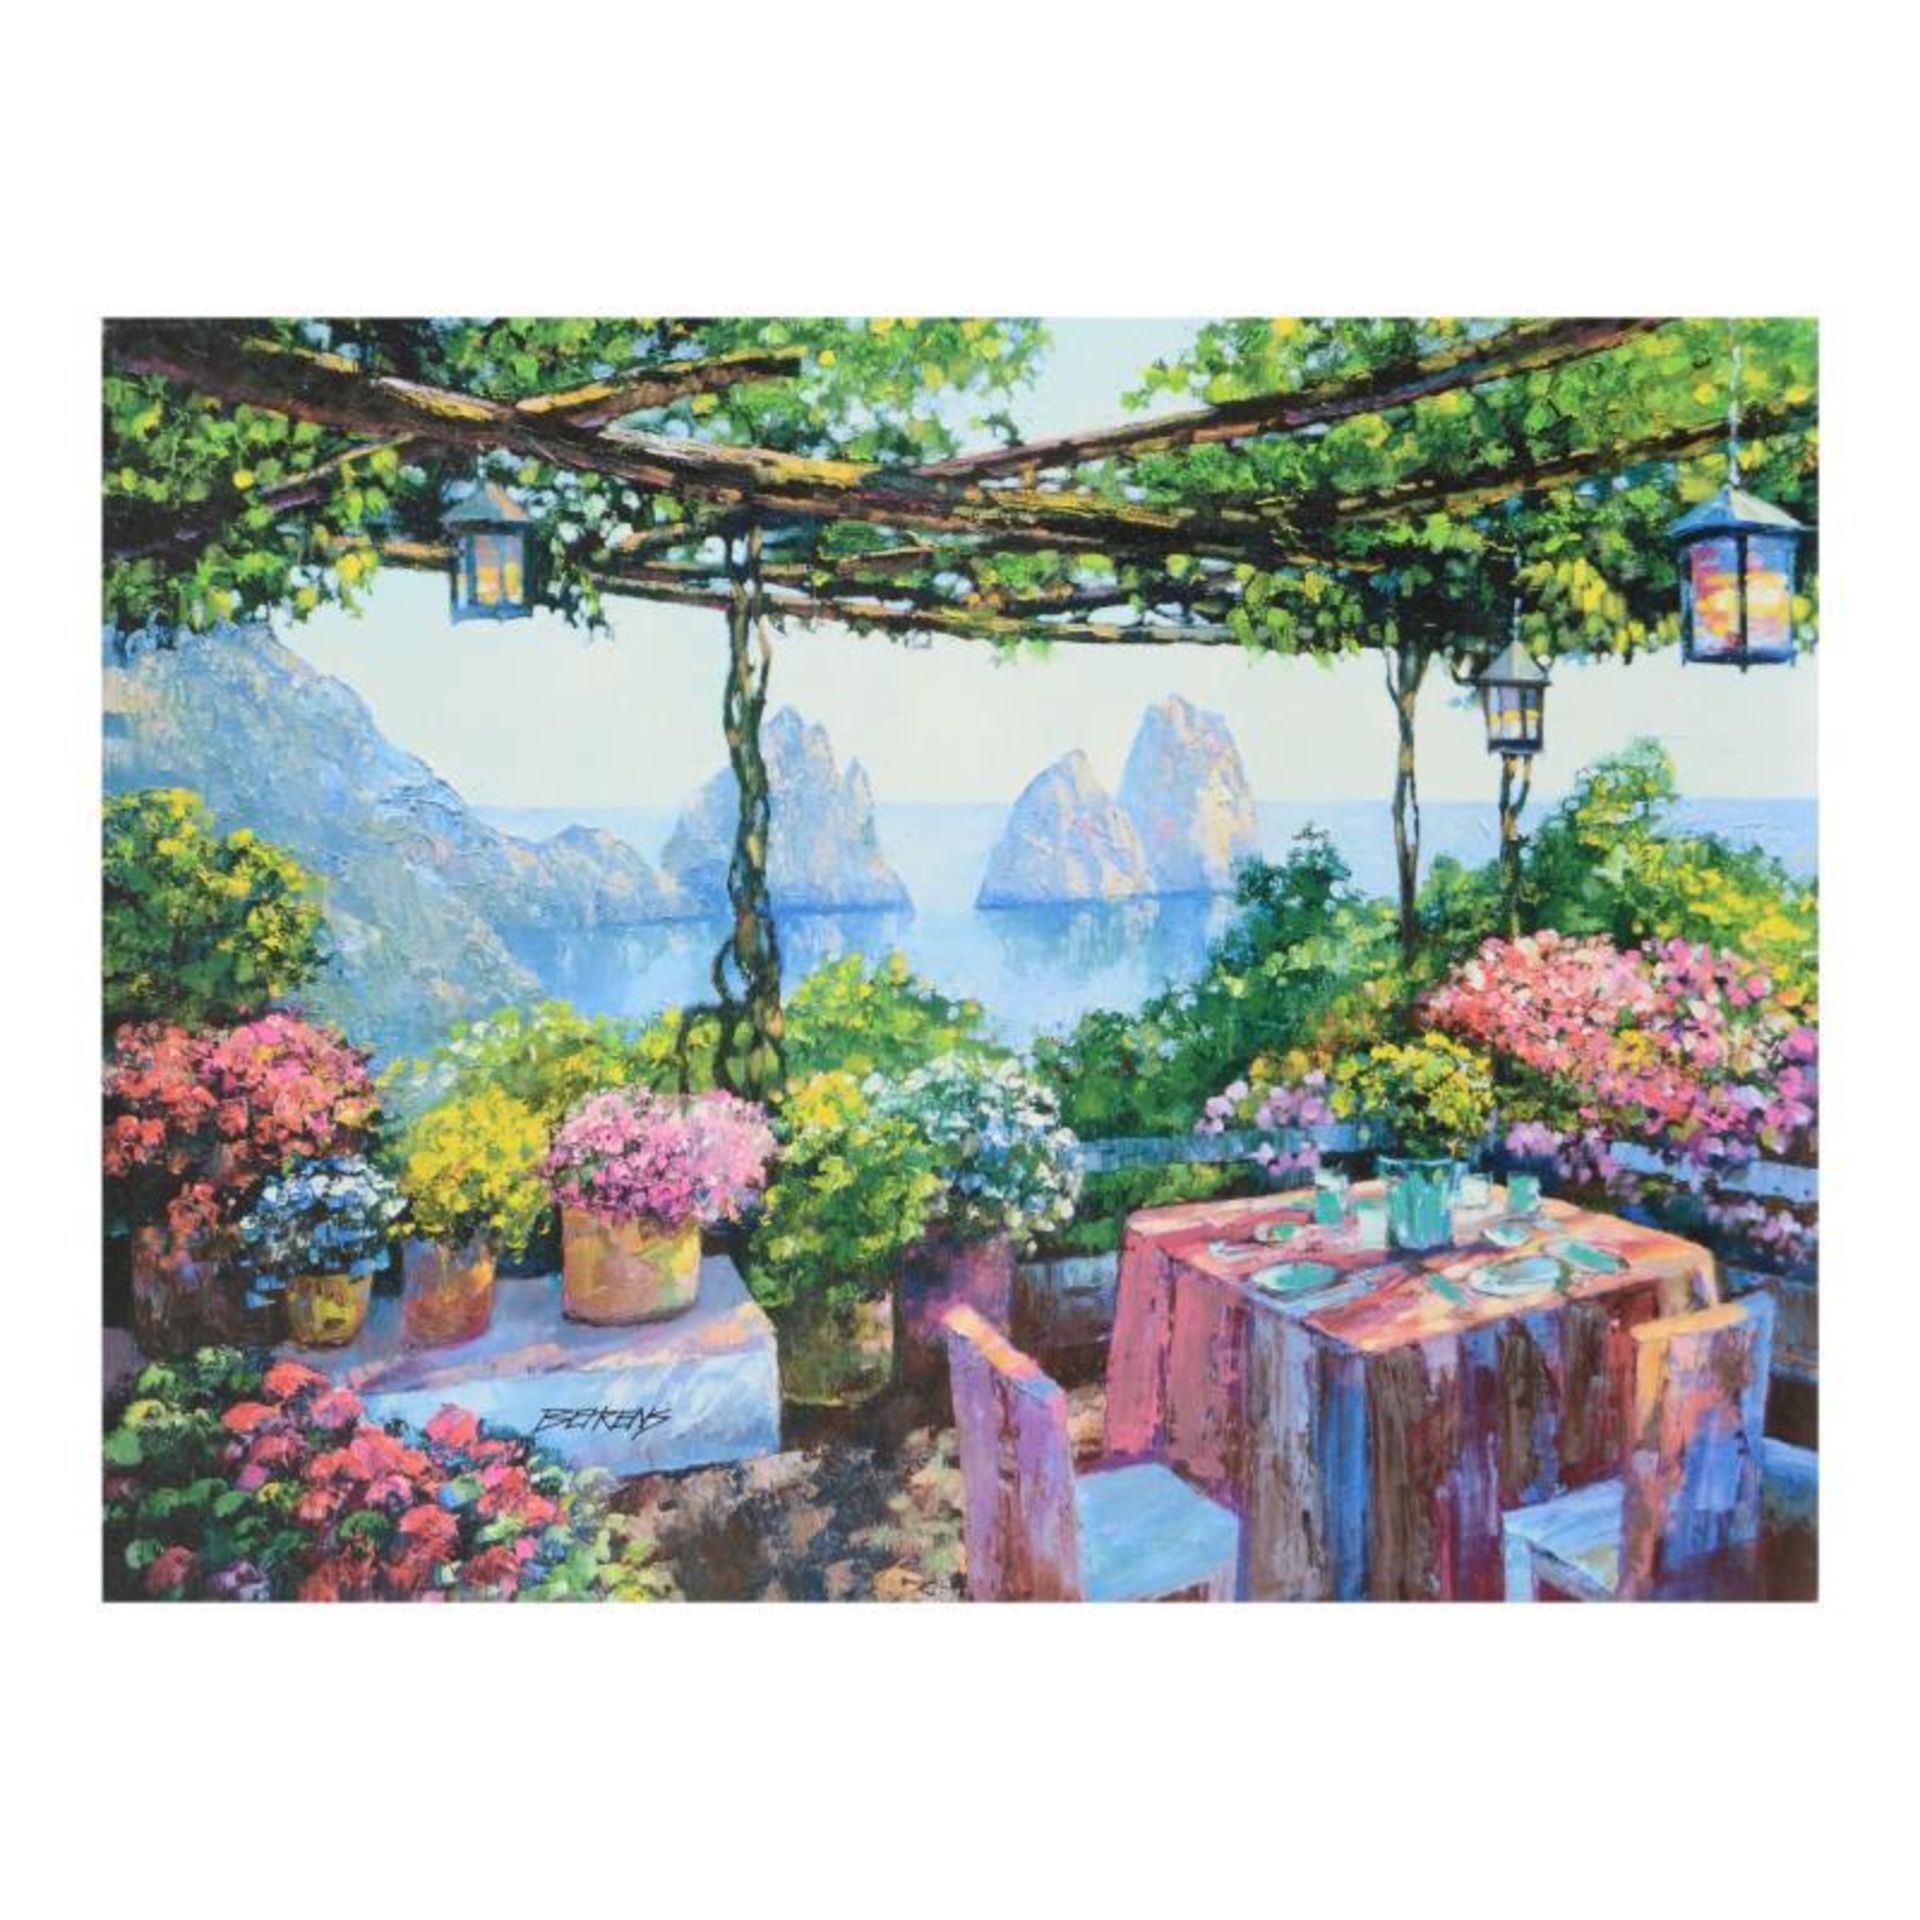 Howard Behrens (1933-2014), "Table For Two, Capri" Limited Edition on Canvas, Nu